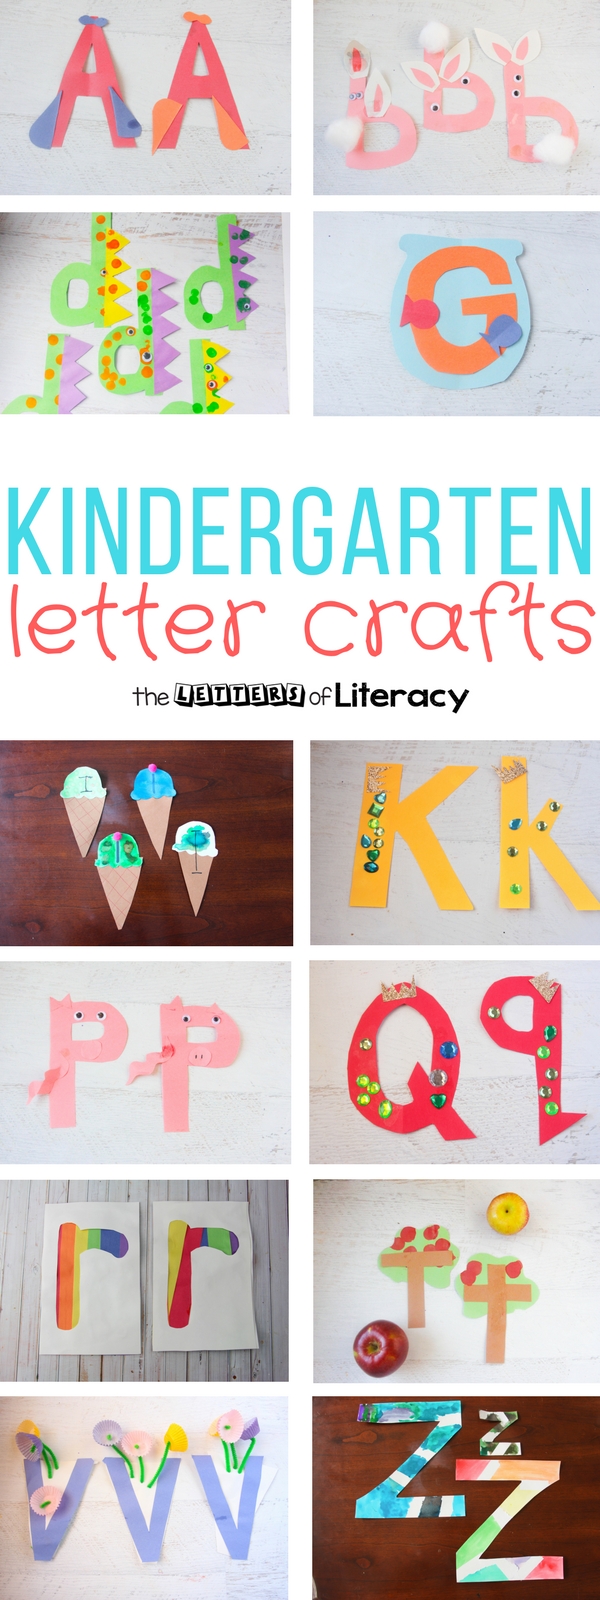 Quick and Easy Kindergarten Letter Crafts from A-Z